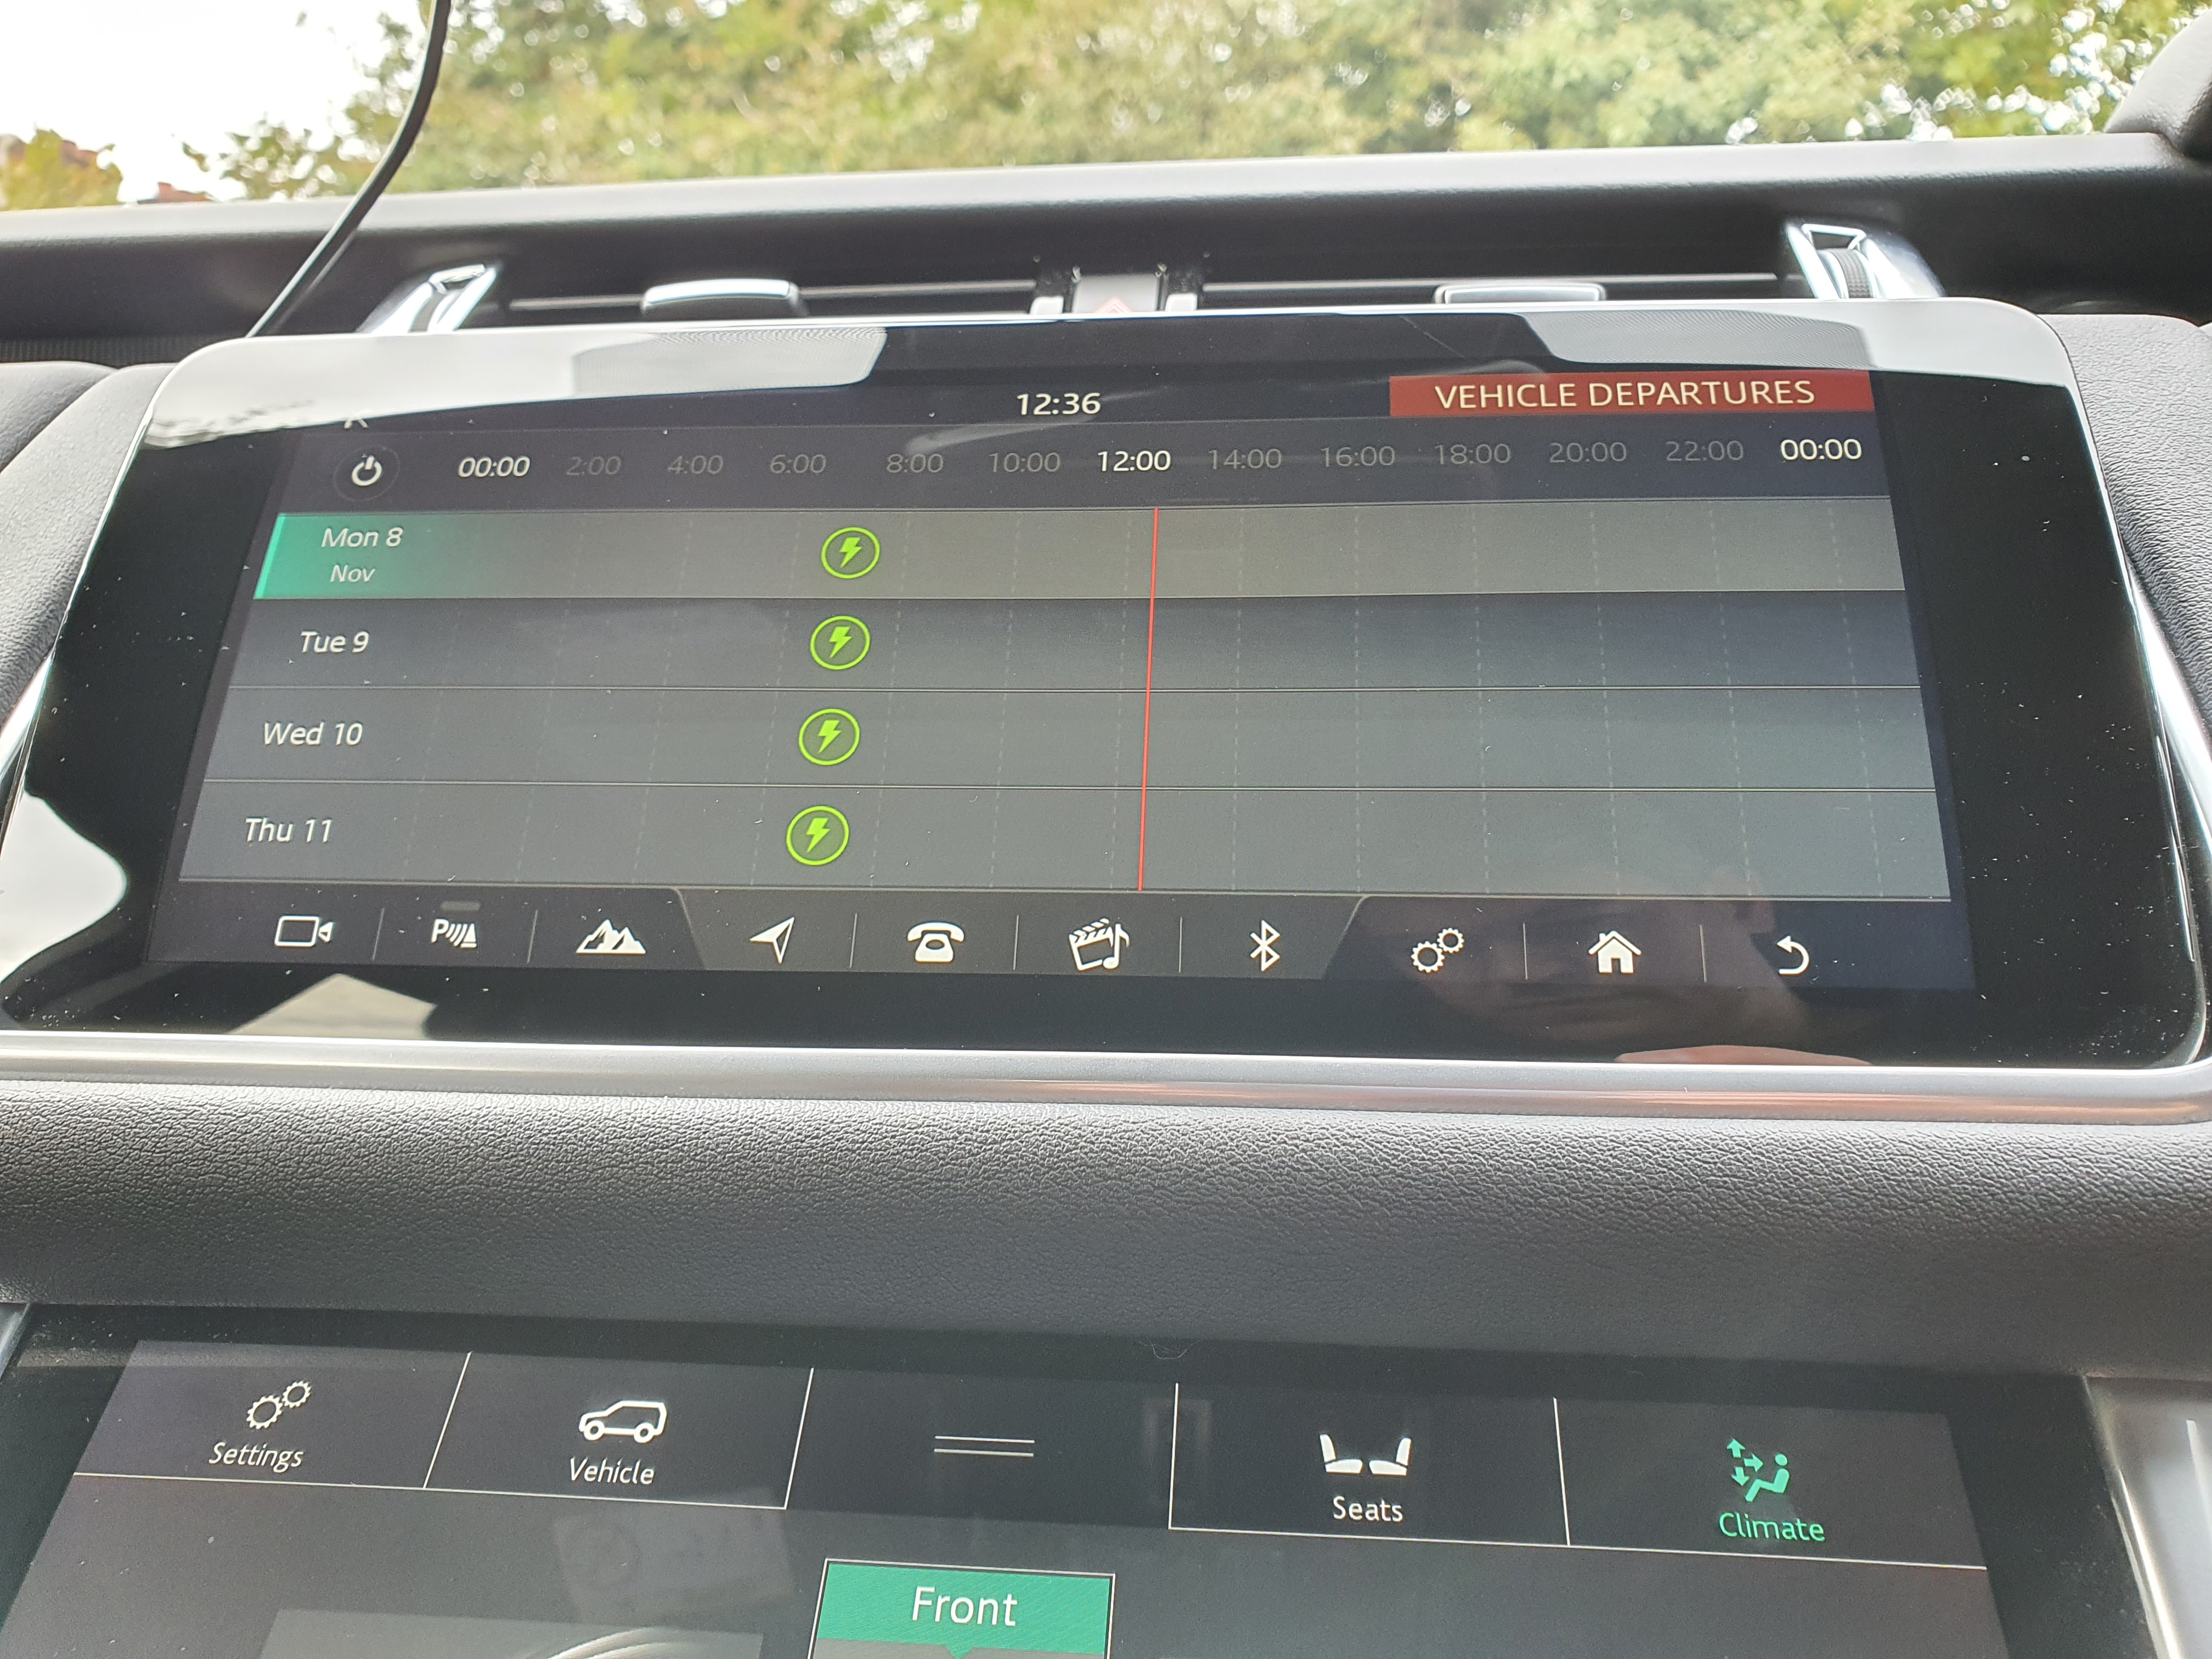 Range Rover Sport plug-in hybrid review - delayed charging schedule